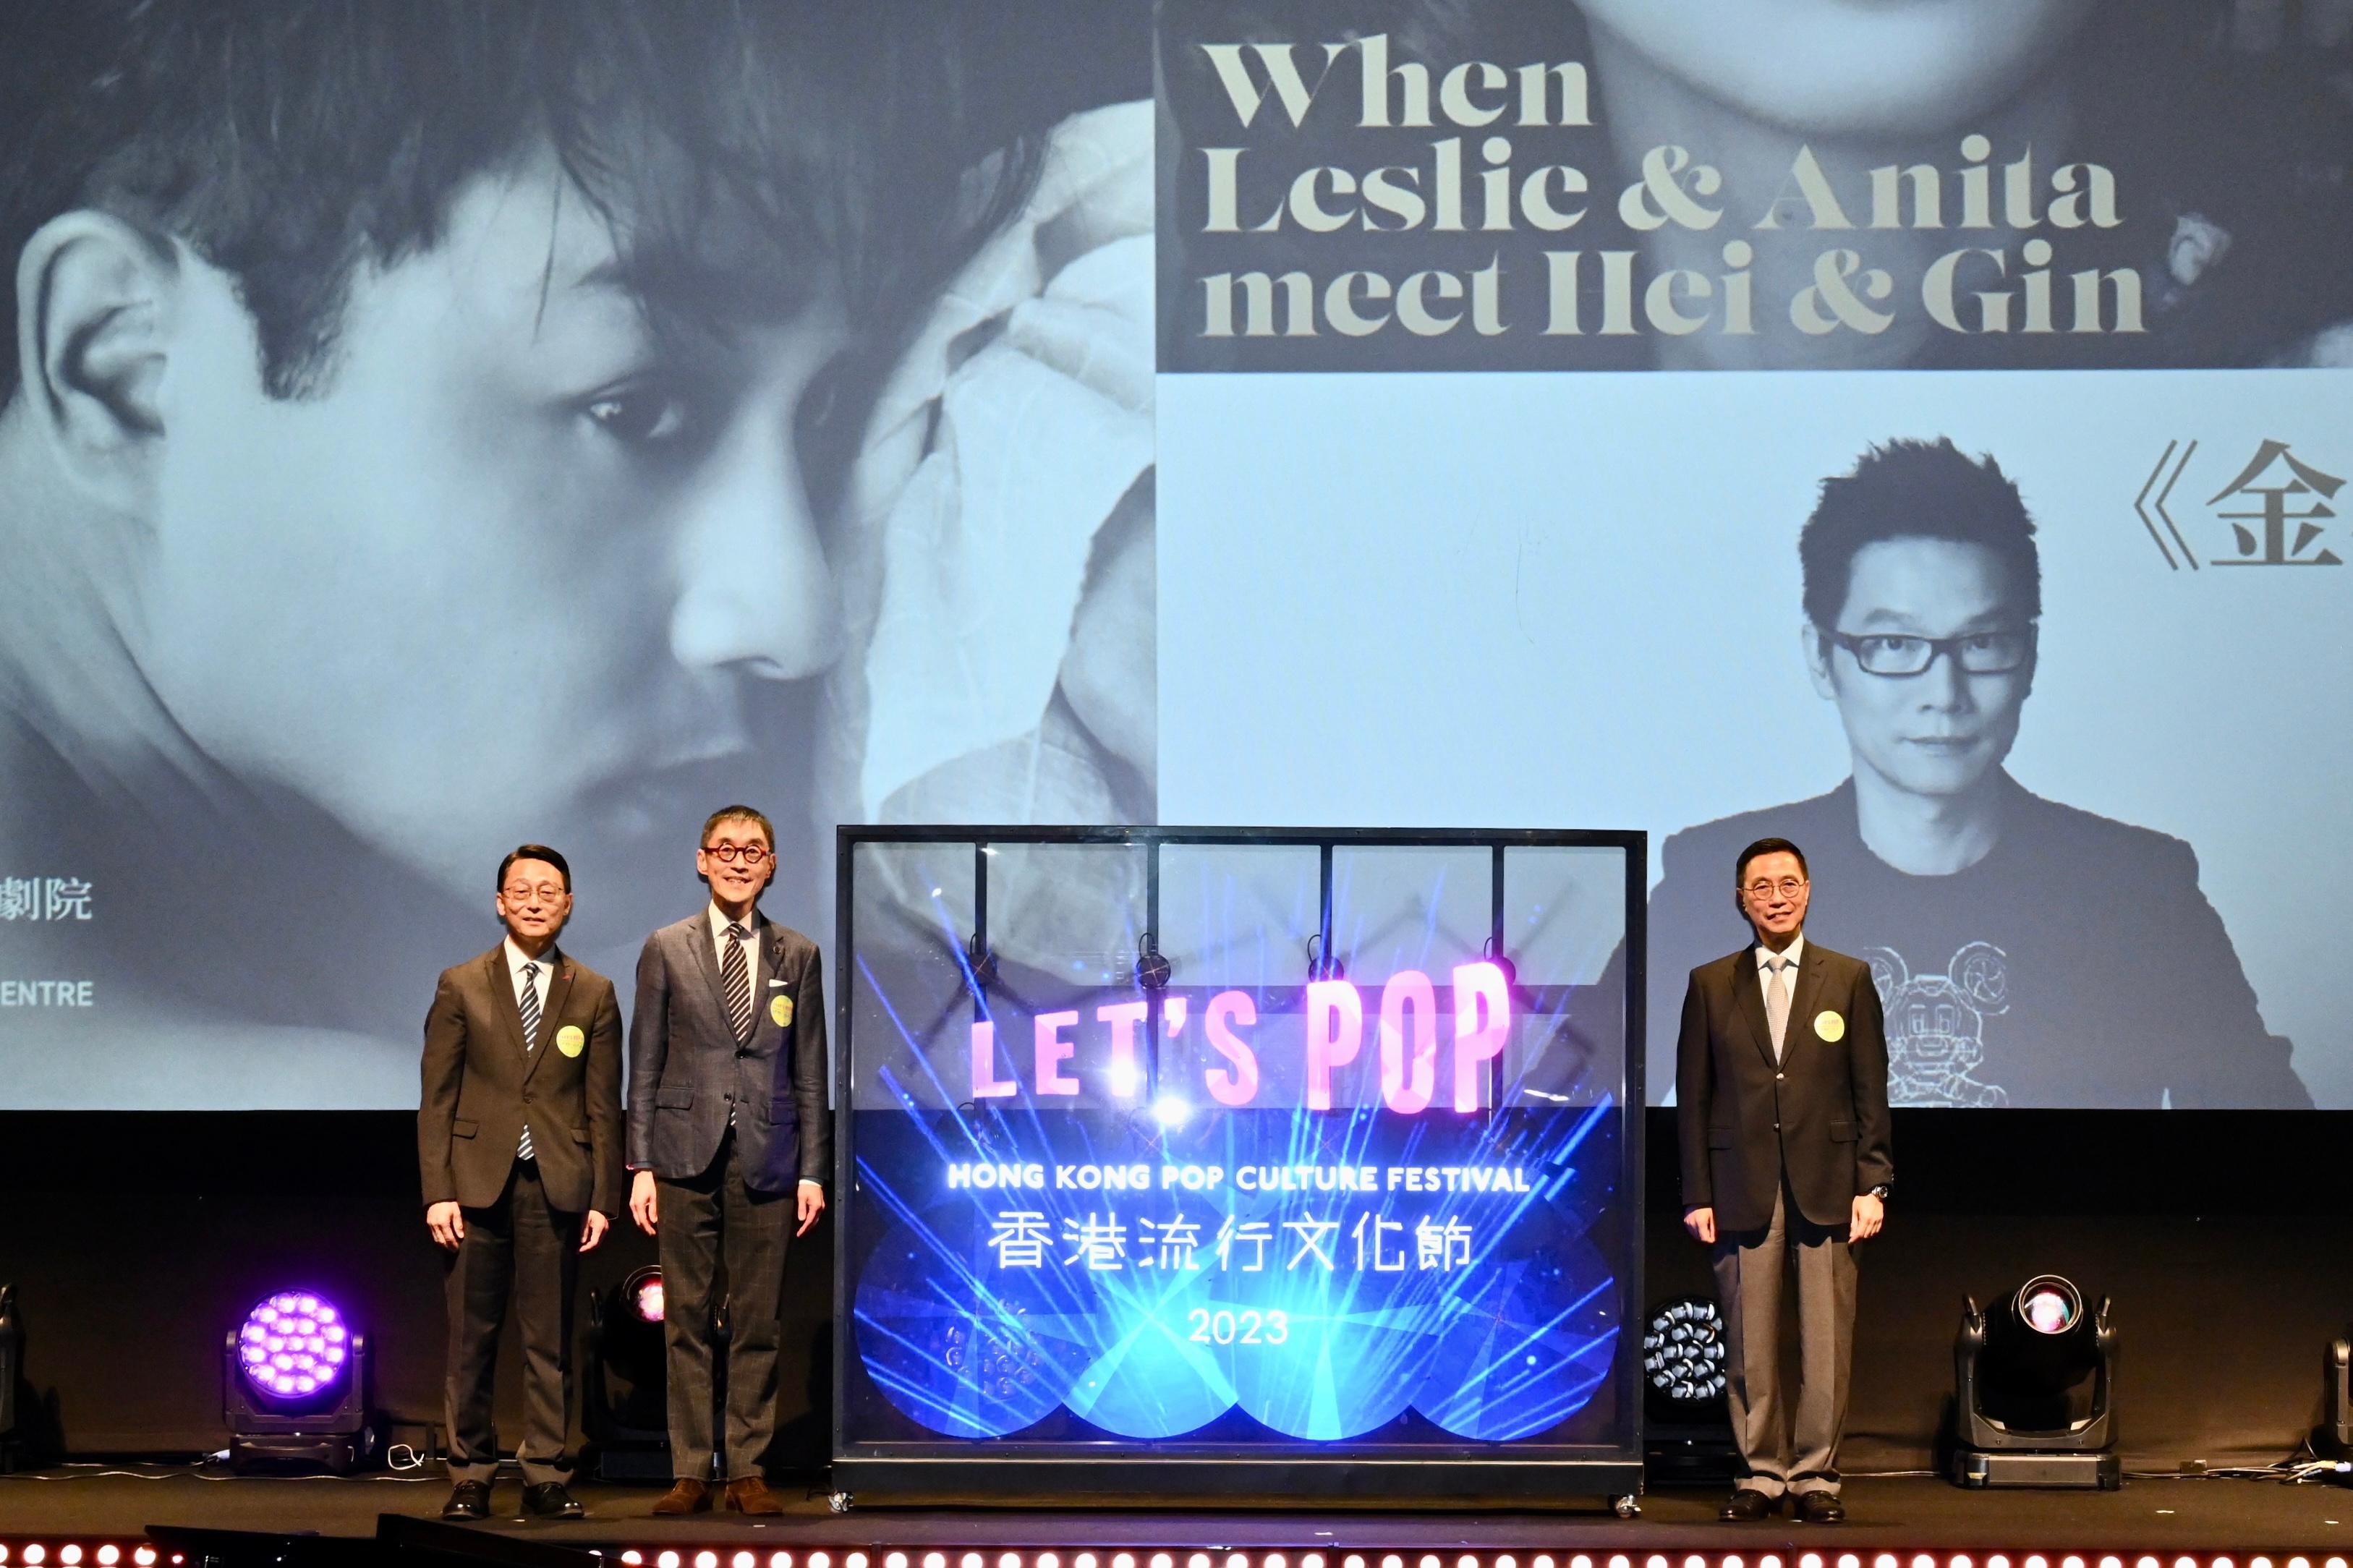 The Secretary for Culture, Sports and Tourism, Mr Kevin Yeung (first right); the Chairman of the Museum Advisory Committee, Professor Douglas So (second left); and the Director of Leisure and Cultural Services, Mr Vincent Liu (first left) officiating at the opening ceremony of the Hong Kong Pop Culture Festival 2023 at the Grand Theatre of the Hong Kong Cultural Centre today (April 22).